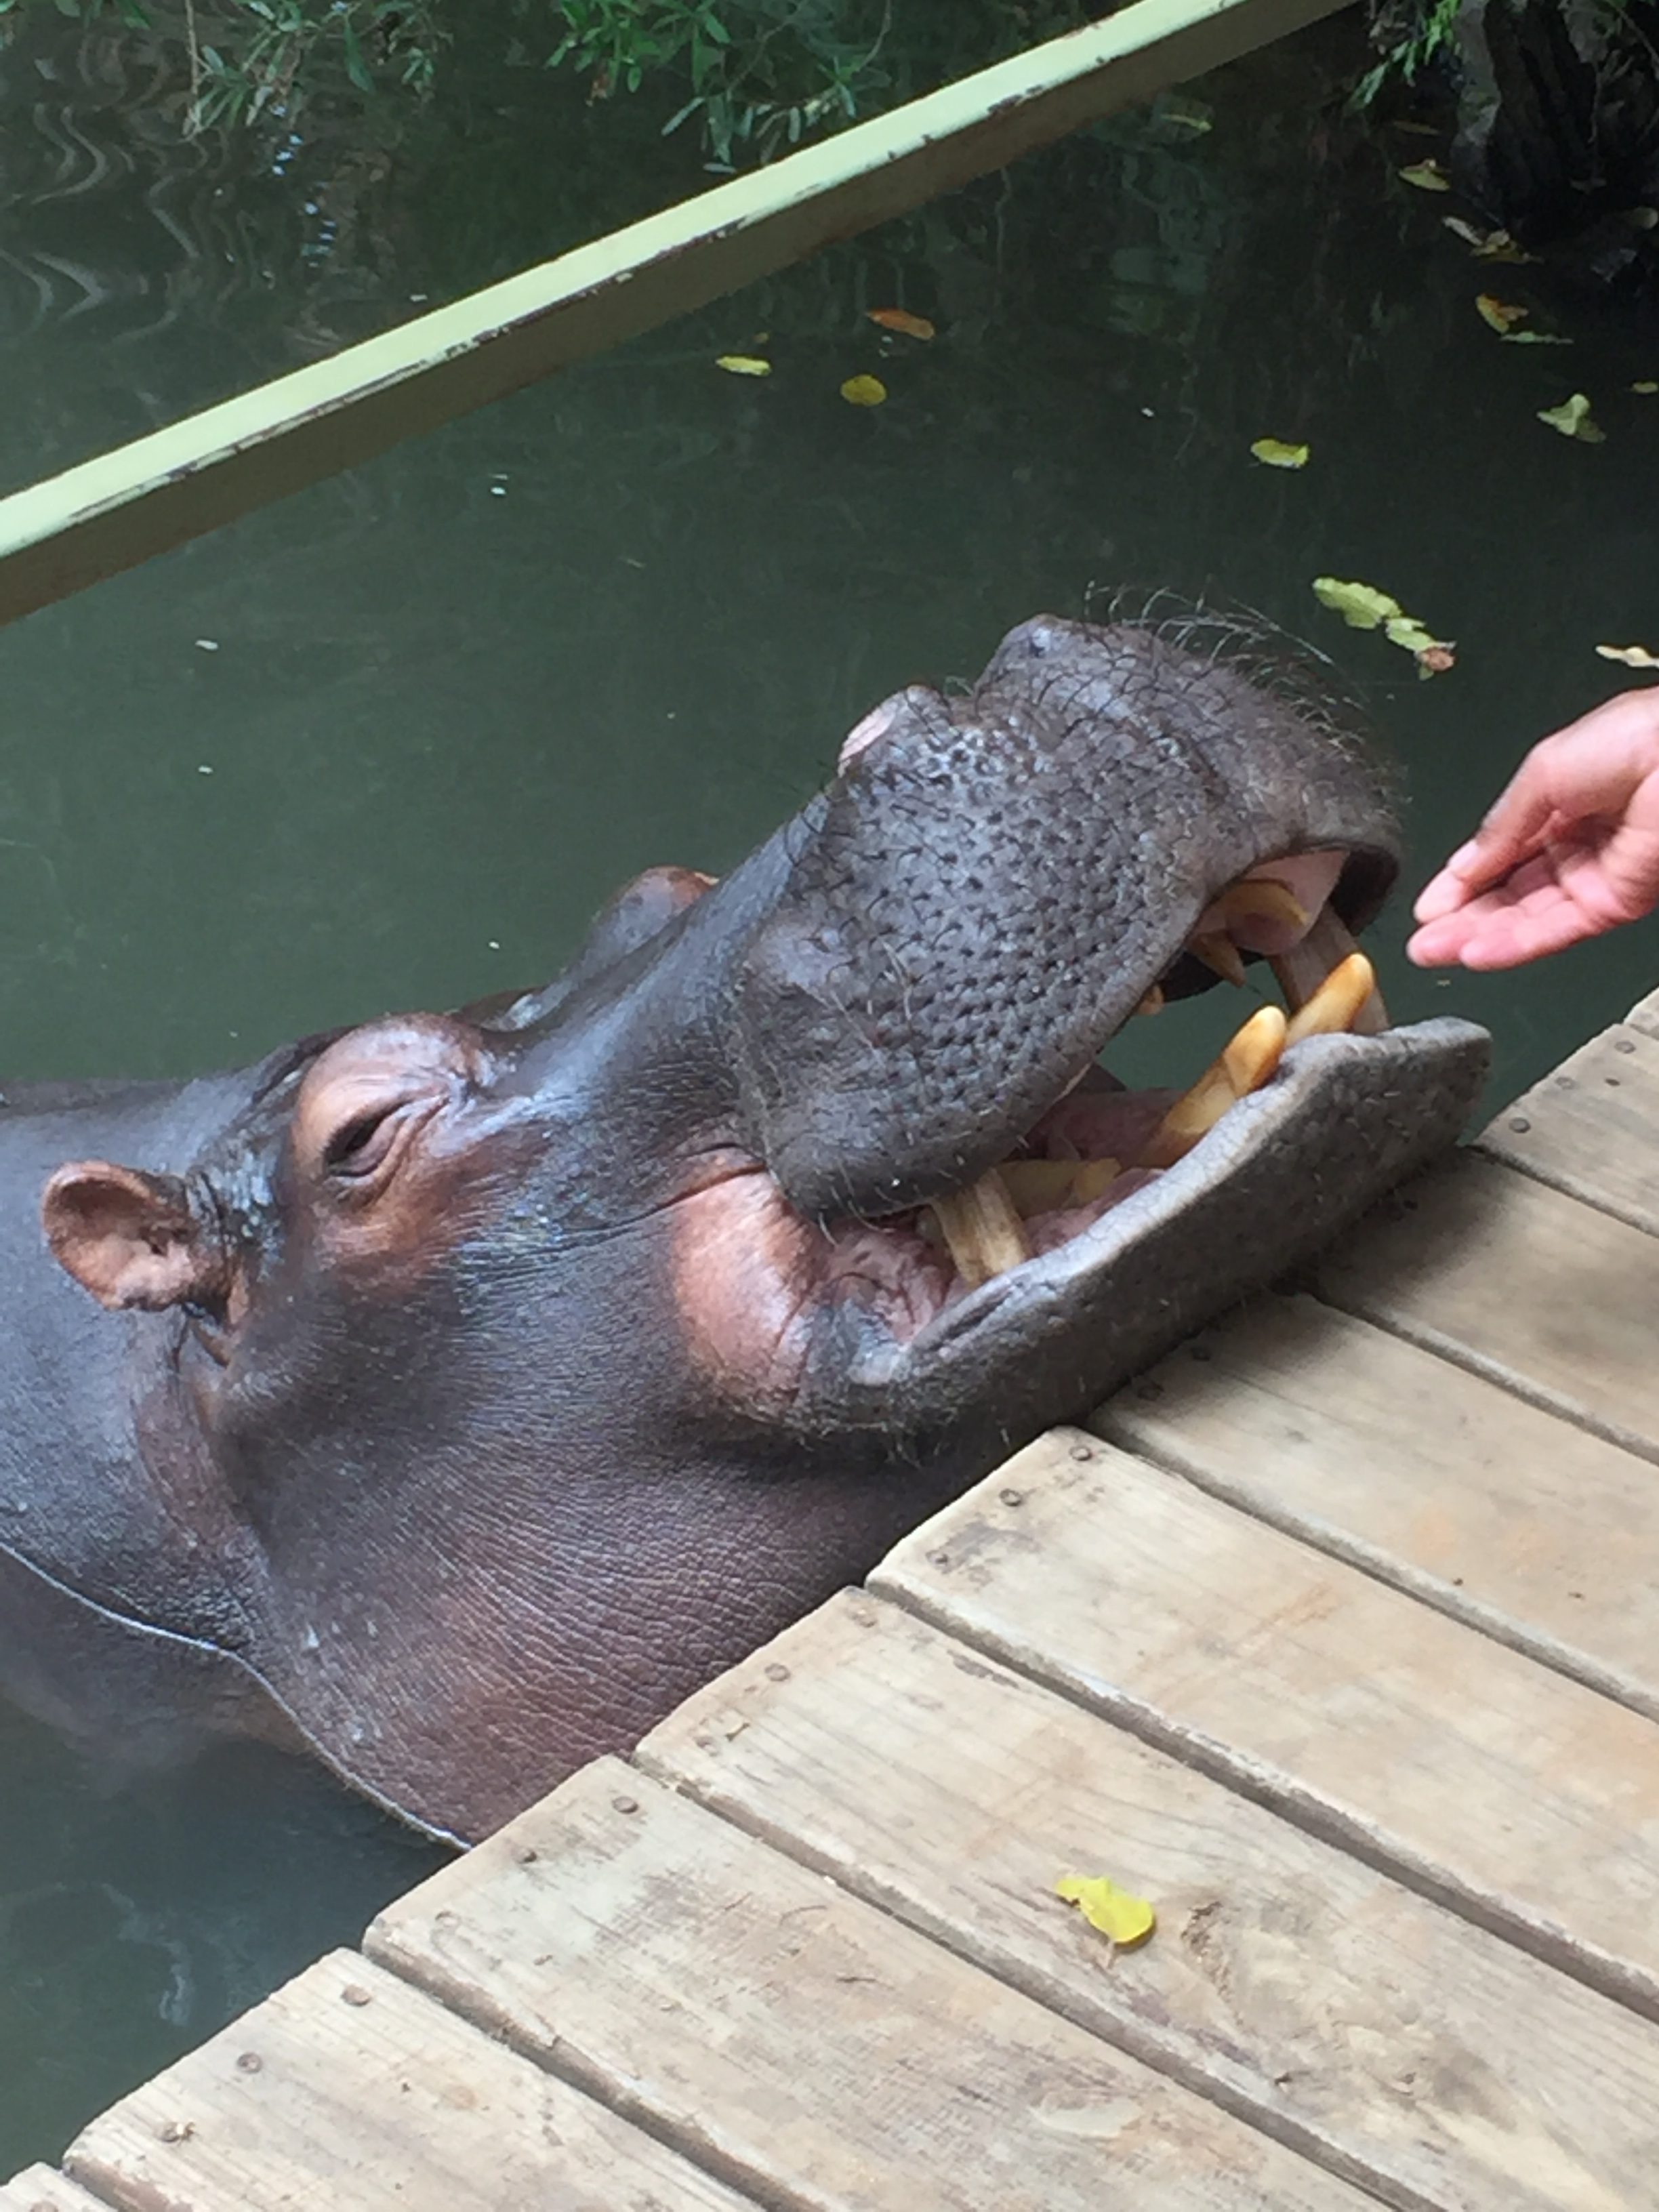 Jessica the worlds friendliest hippo will gladly trade snuggles for a mouthful of potatoes. 